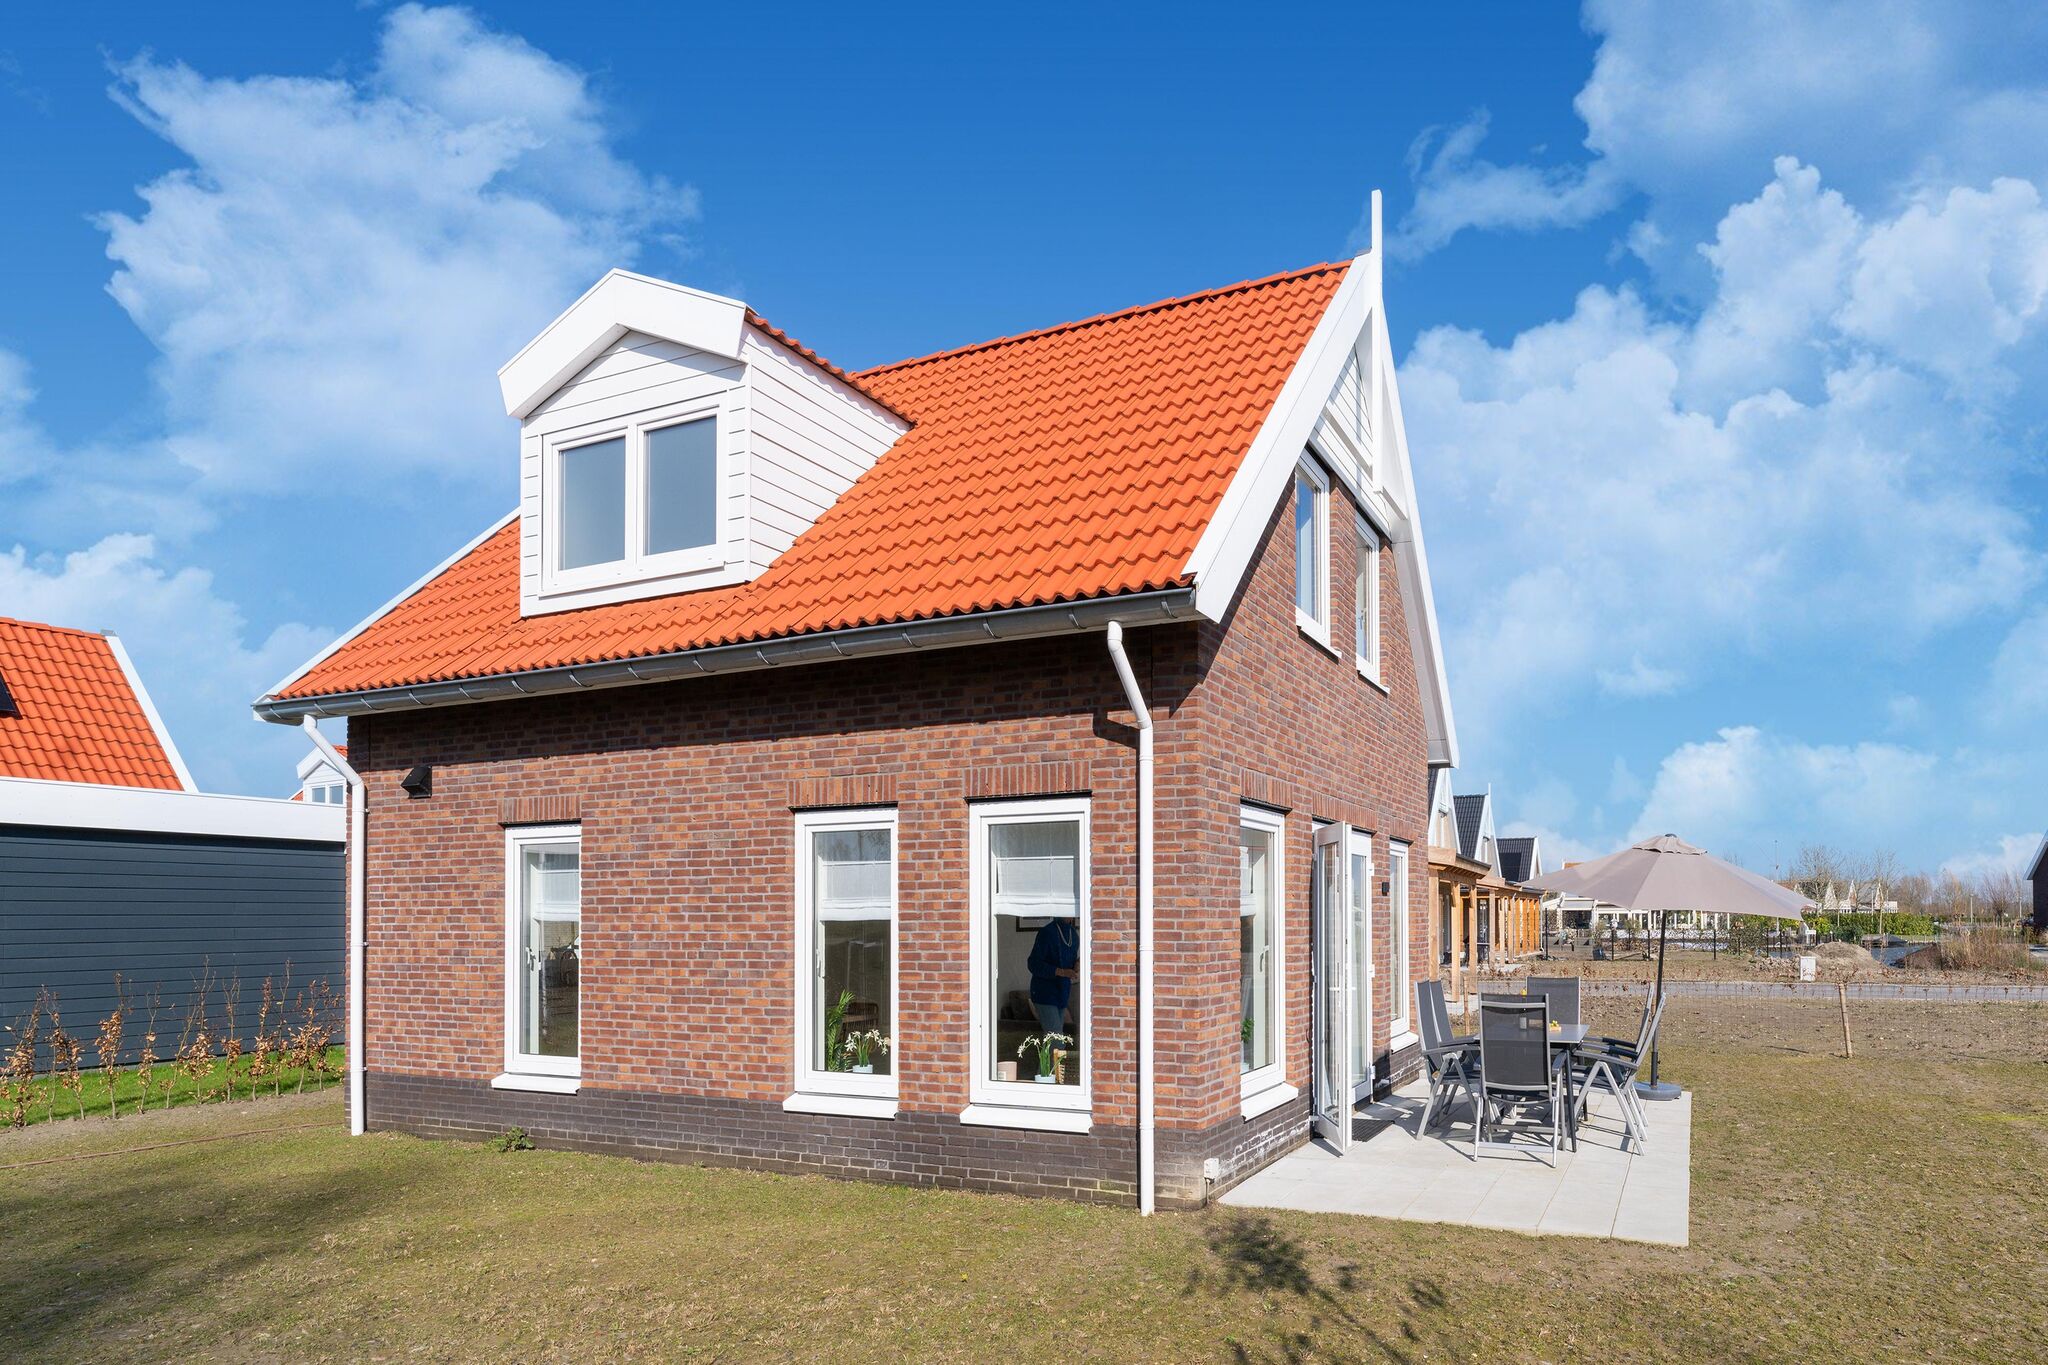 Nice holiday home in Simonshaven near the water